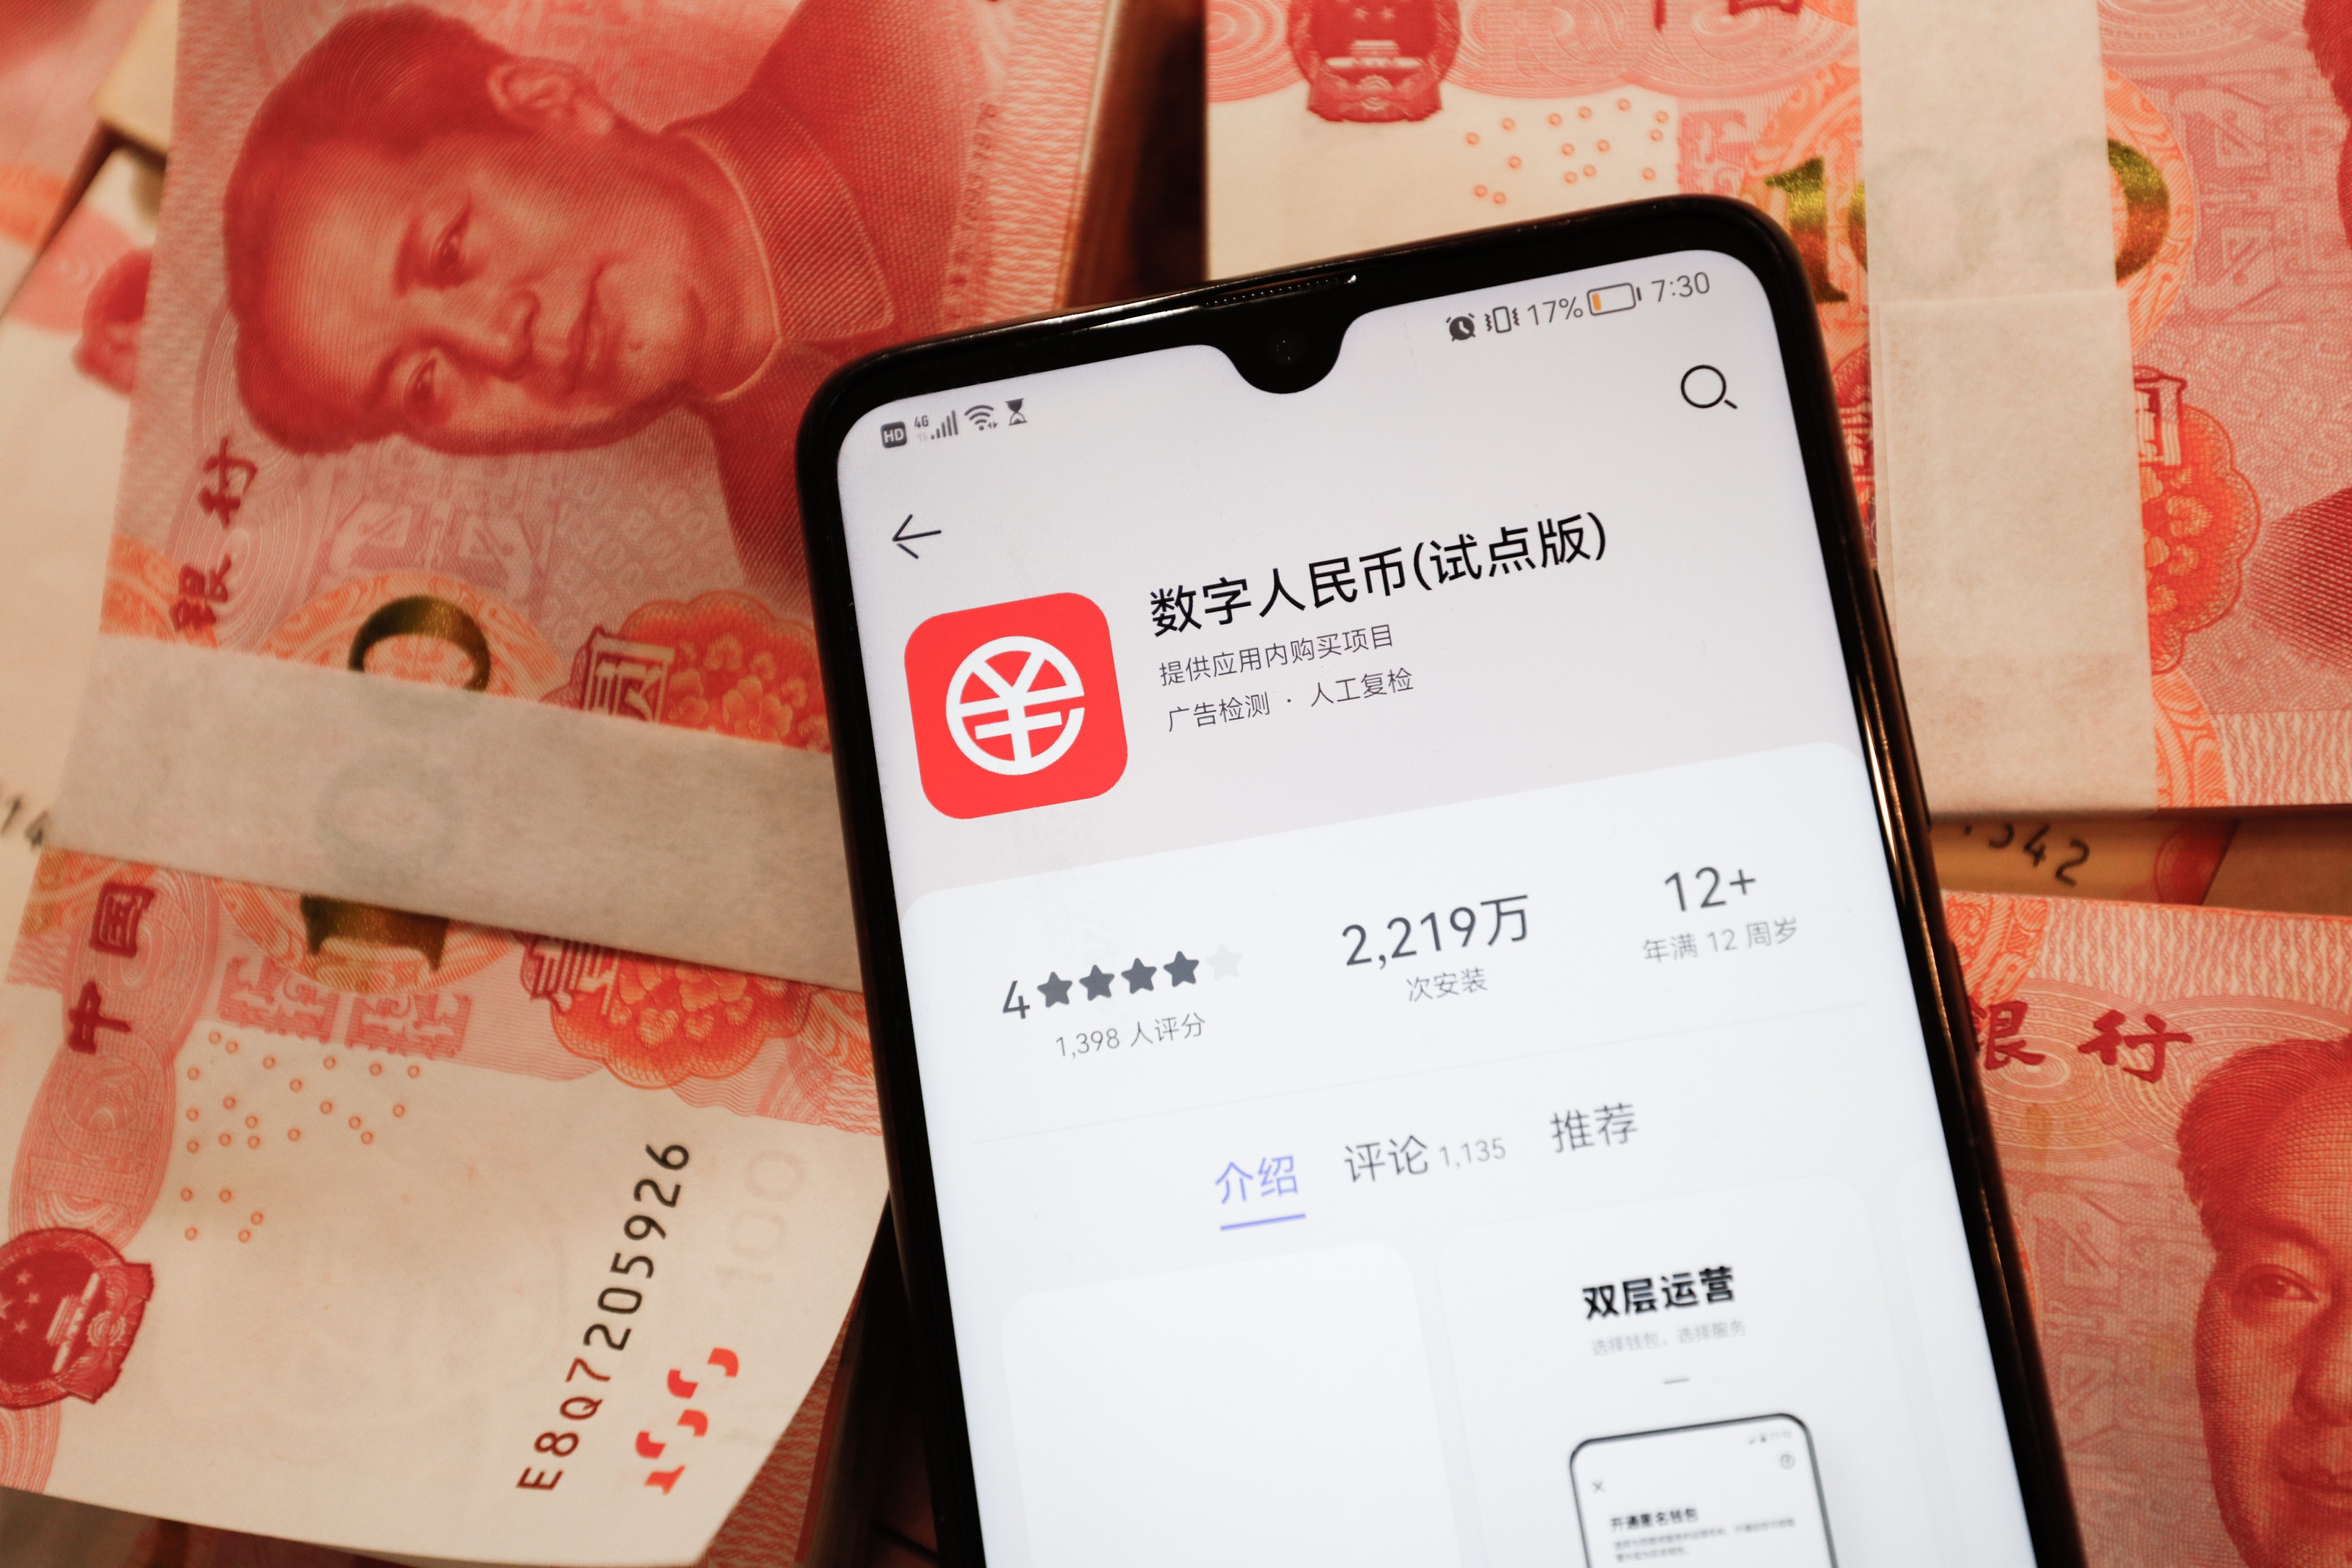 China’s central bank is working with local authorities in the Guangxi Zhuang autonomous region to broadly expand use of the nation’s burgeoning digital currency. Photo: Shutterstock